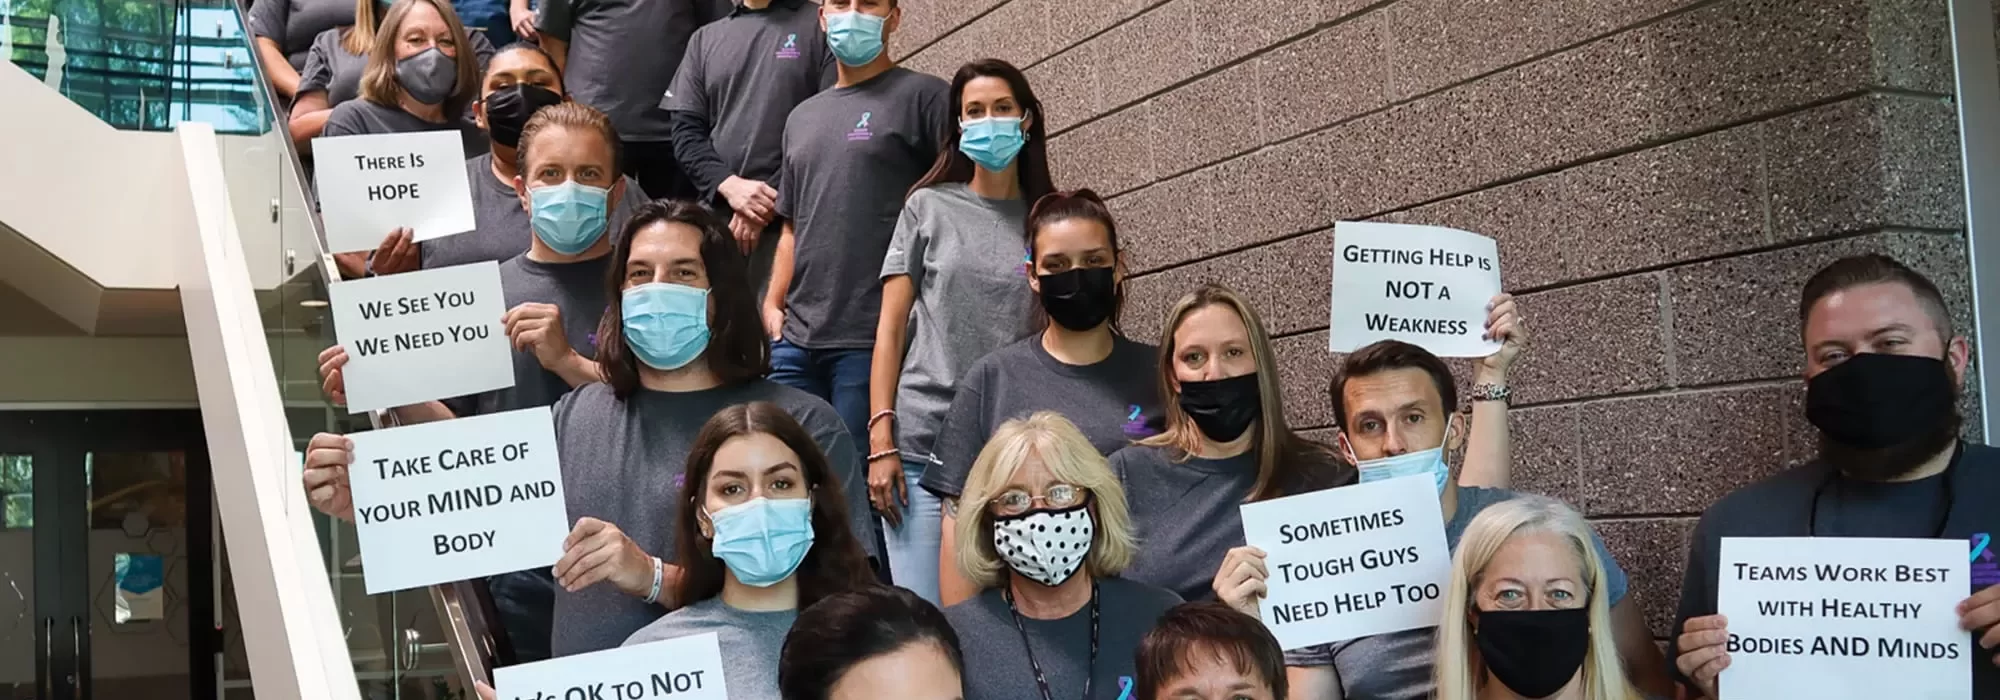 Workers wearing masks and holding signs